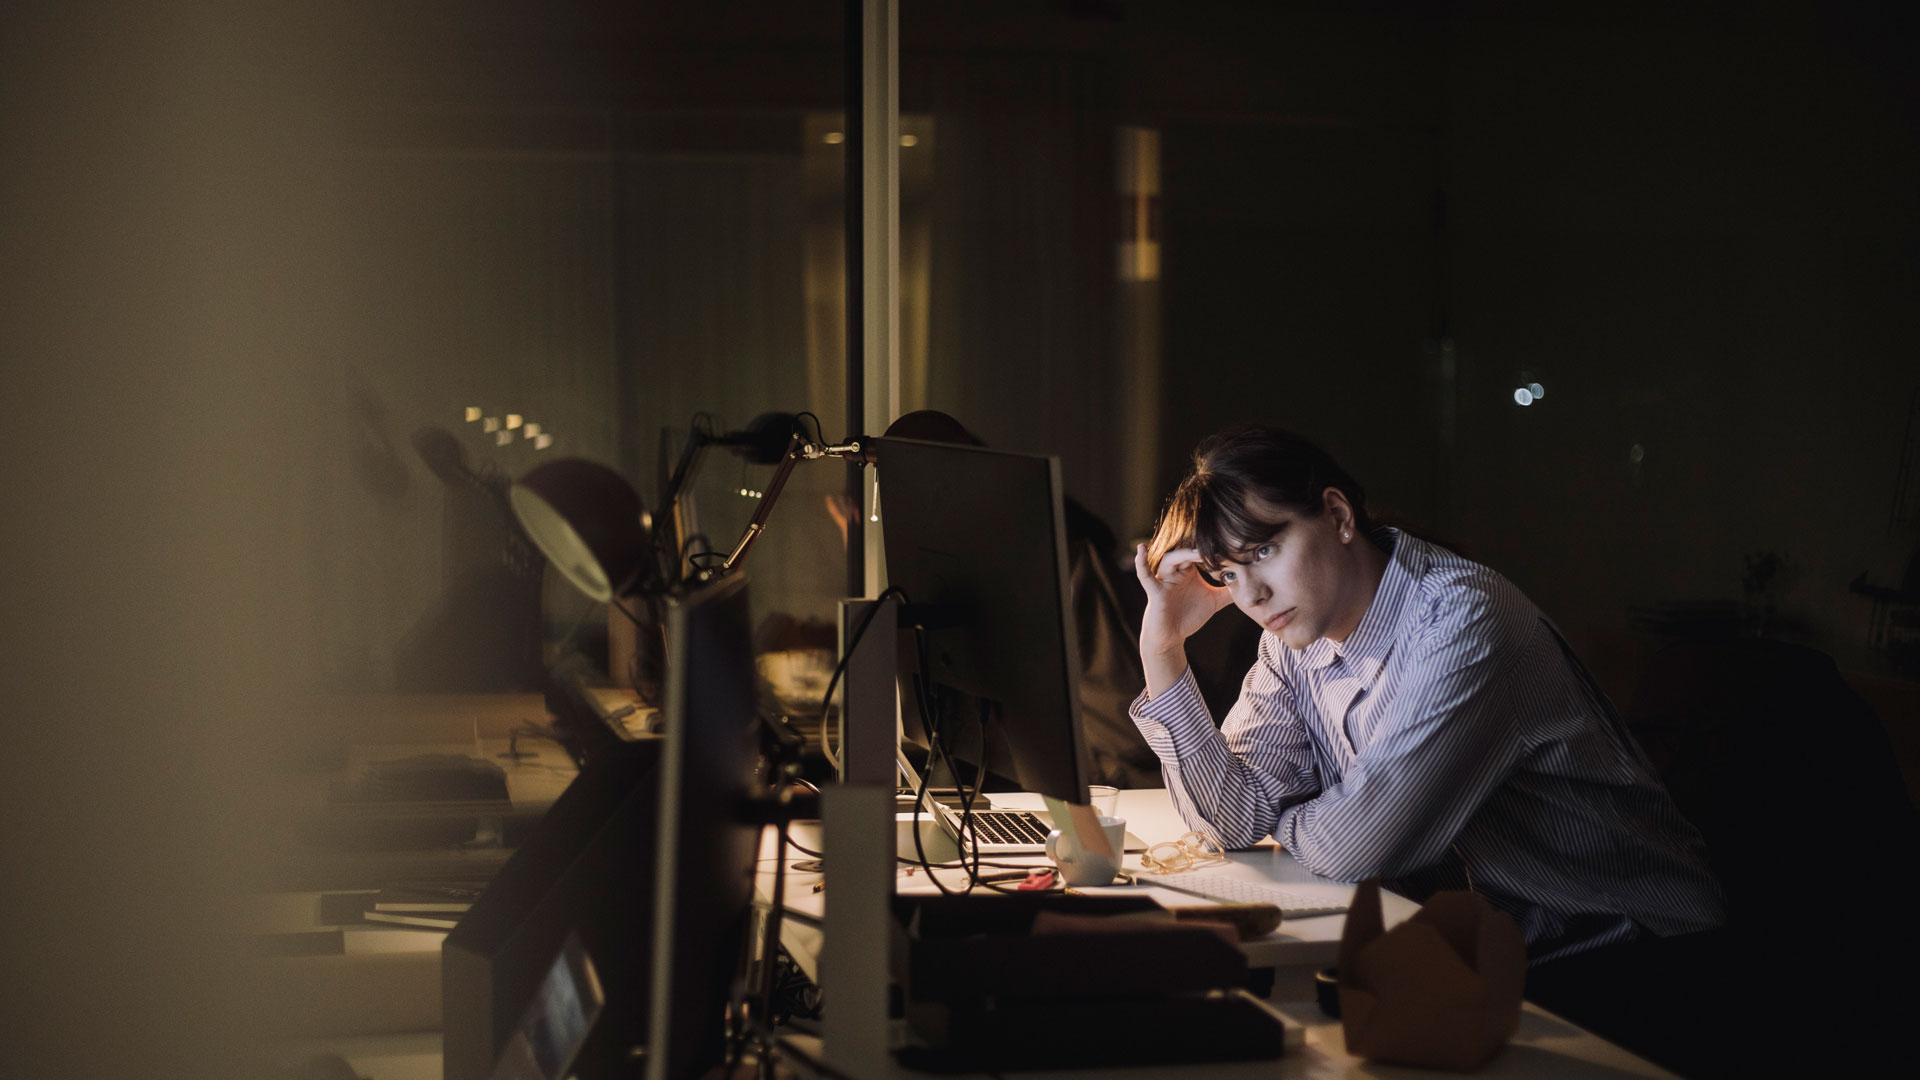 Woman working late in an office at night.